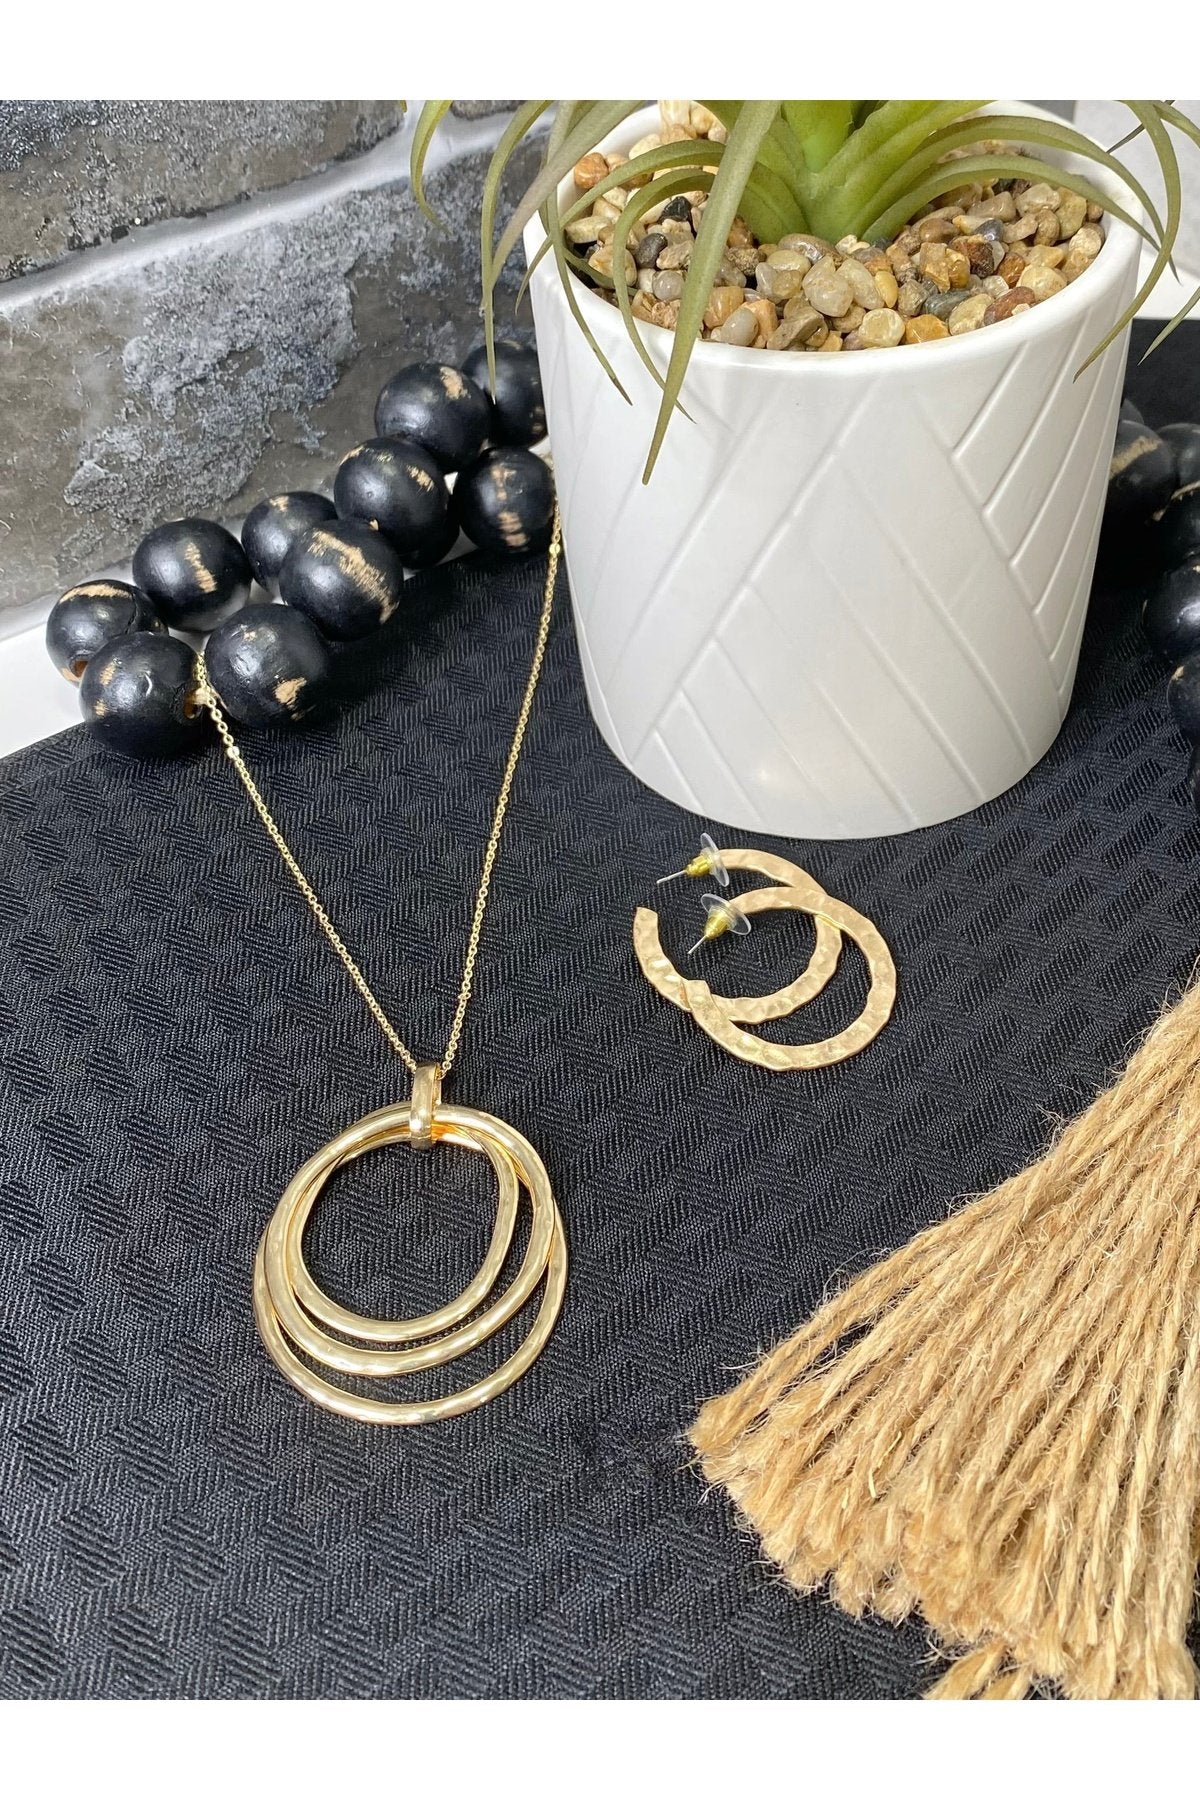 Hammered Metal Tri Circles Pendant Long Necklace in Gold